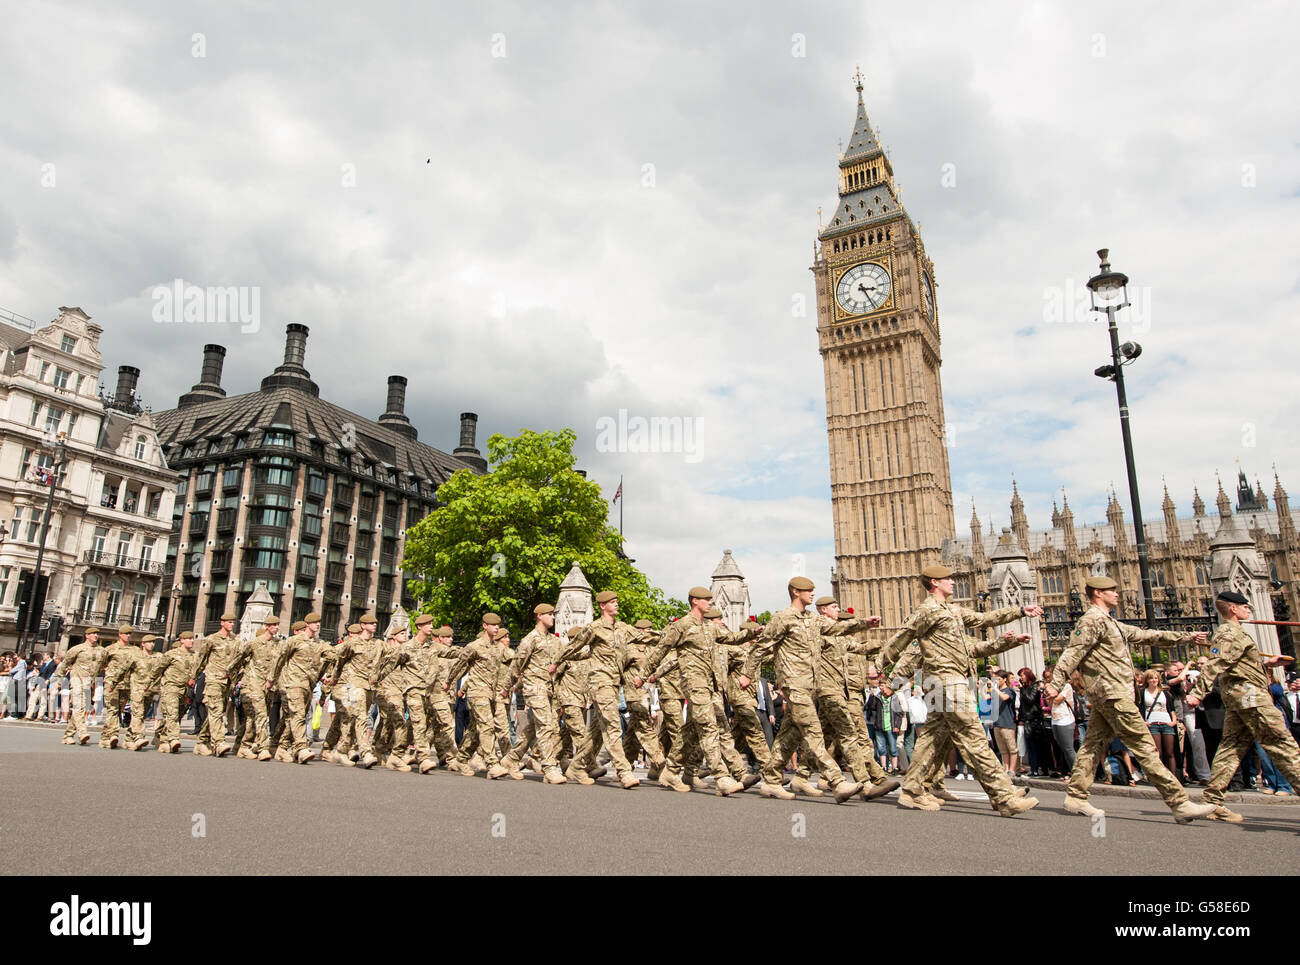 Soldiers from 20 Armoured Brigade arrive at the Houses of Parliament, in Westminster, London, to attend a reception at the Palace of Westminster, following their return from Afghanistan. PRESS ASSOCIATION Photo. Picture date: Tuesday June 19, 2012. Photo credit should read: Dominic Lipinski/PA Wire Stock Photo